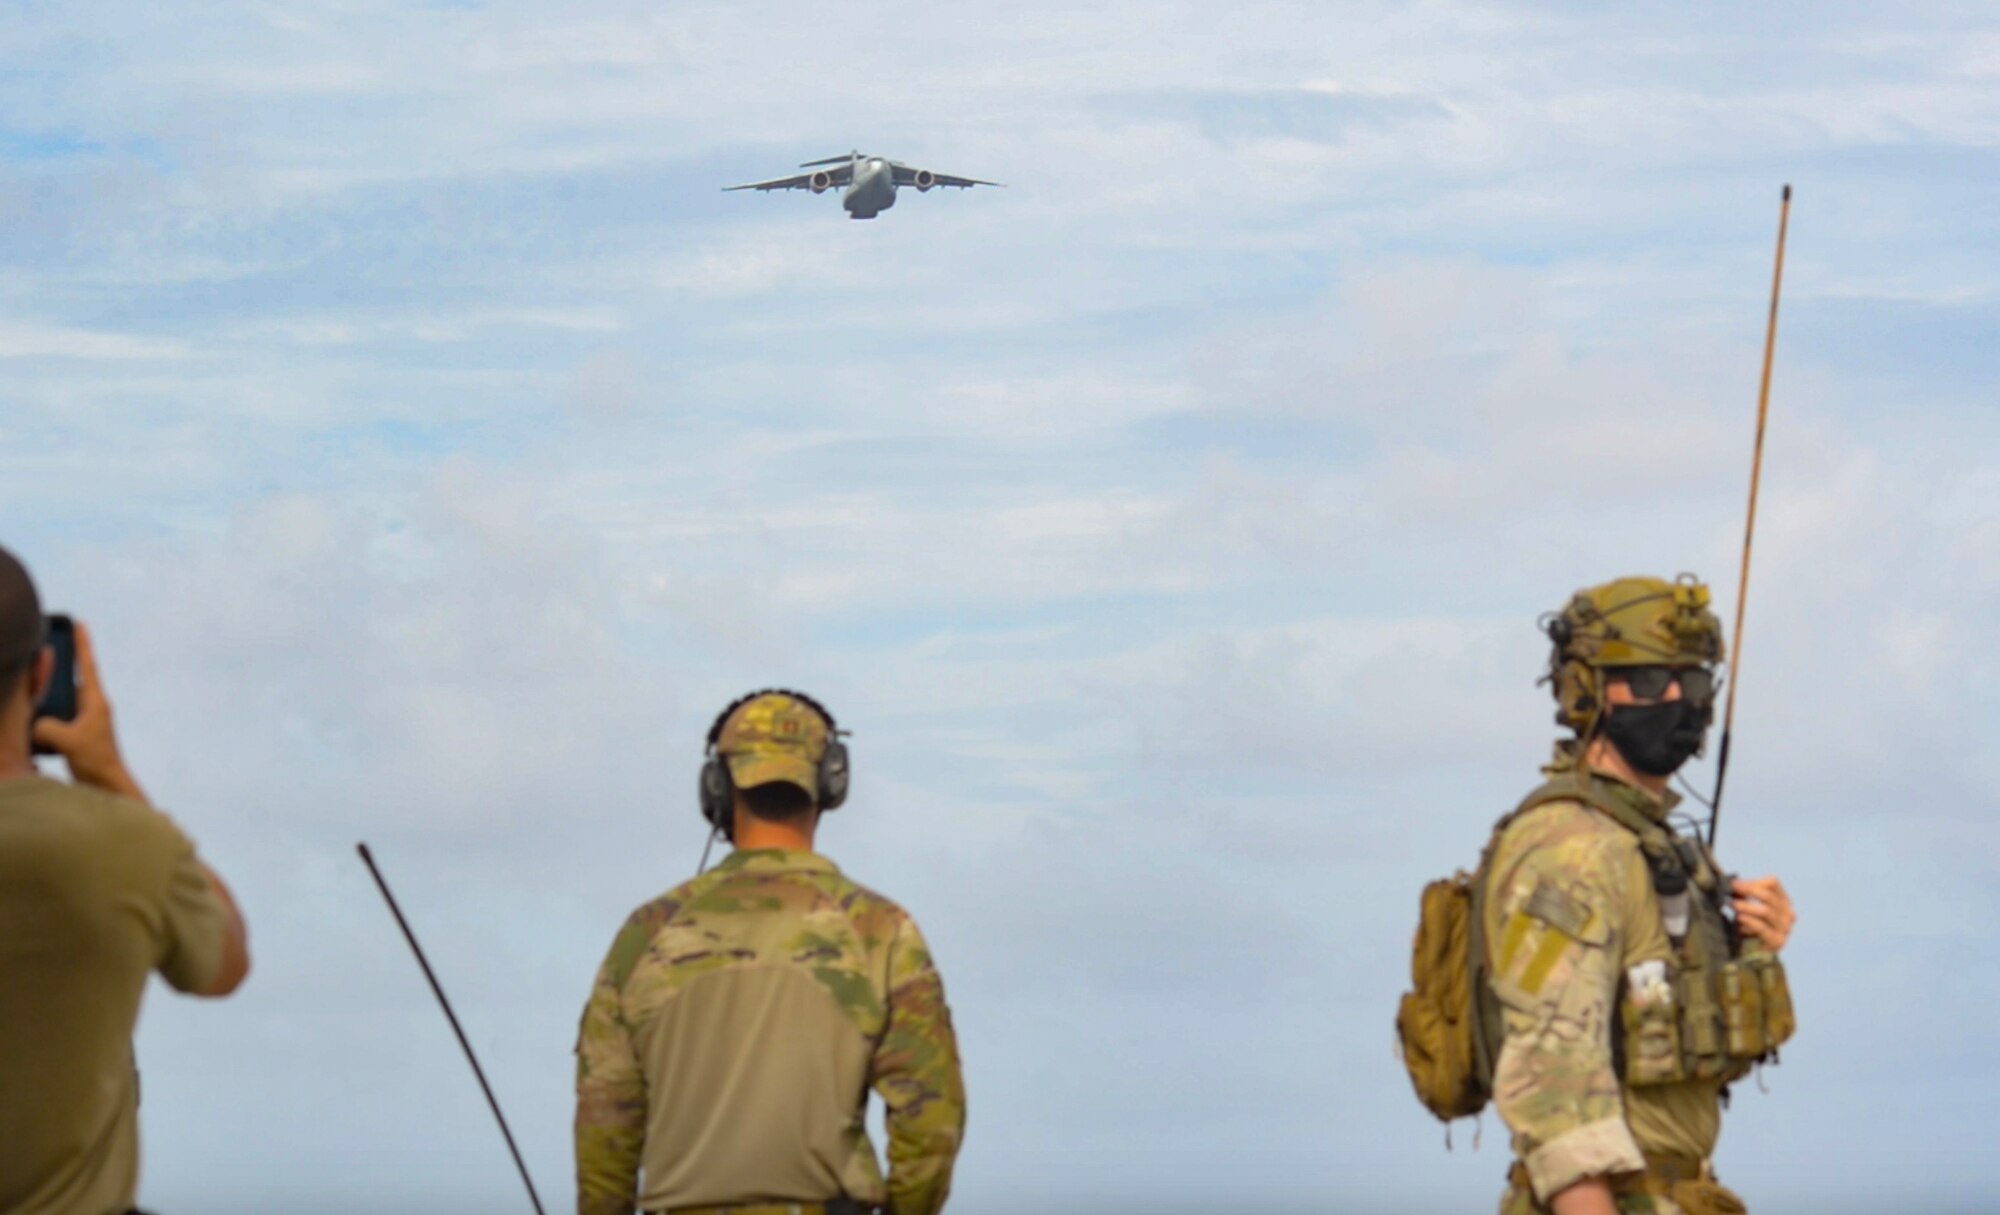 Members of the 36th Contingency Response Group watch as a Koku-Jieitai Kawasaki C-2, assigned to the 403rd Squadron from Miho Air Base, approaches for an airdrop during Cope North 21, Feb. 10, 2021, on Angaur, Palau.